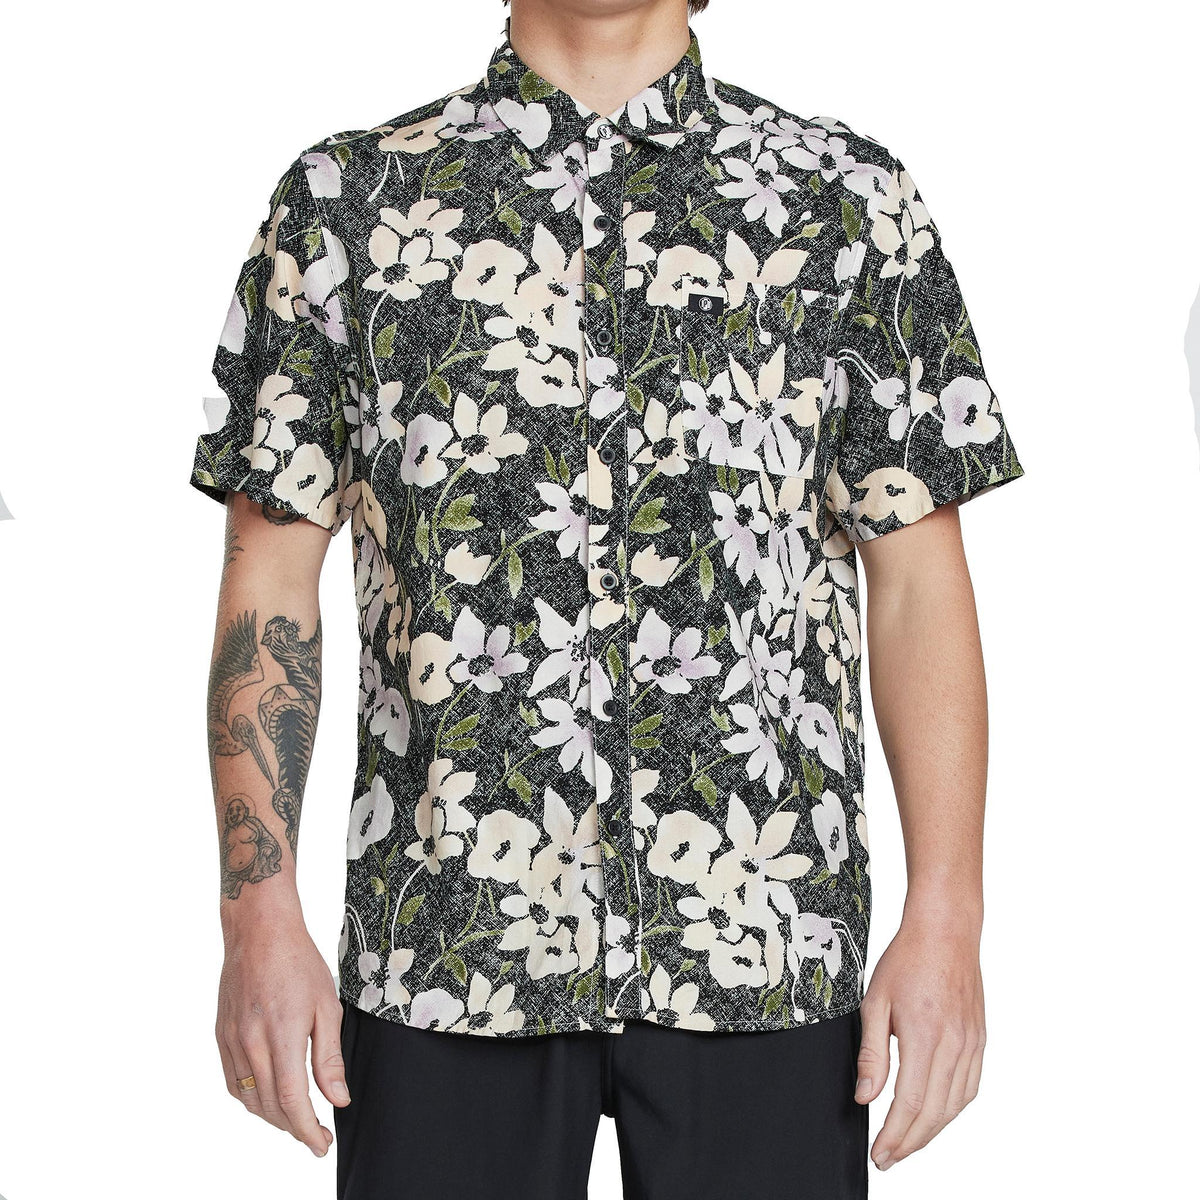 Front view of a men&#39;s short sleeve floral button-down shirt. The shirt features and white and yellow floral pattern against a faded black background. The shirt is neatly buttoned and has a classic collar.